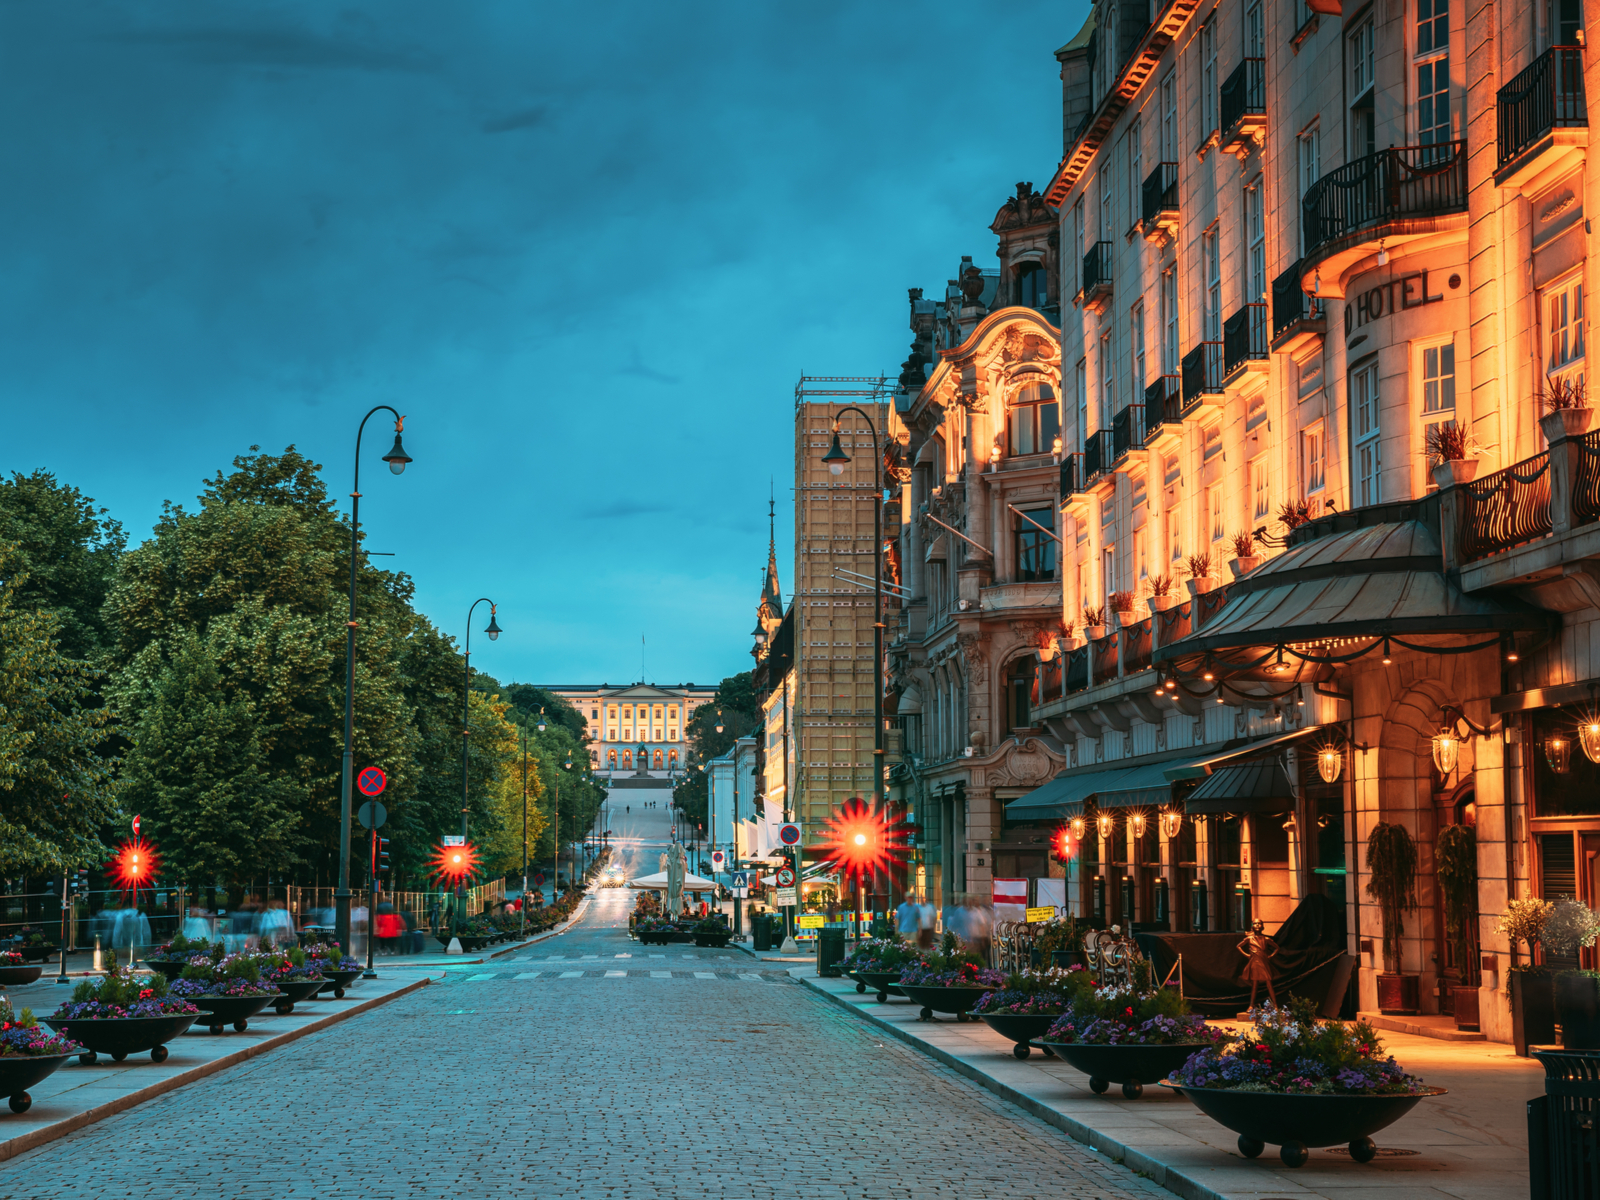 Old town Oslo pictured at night with lighted buildings during the least busy time to visit Norway